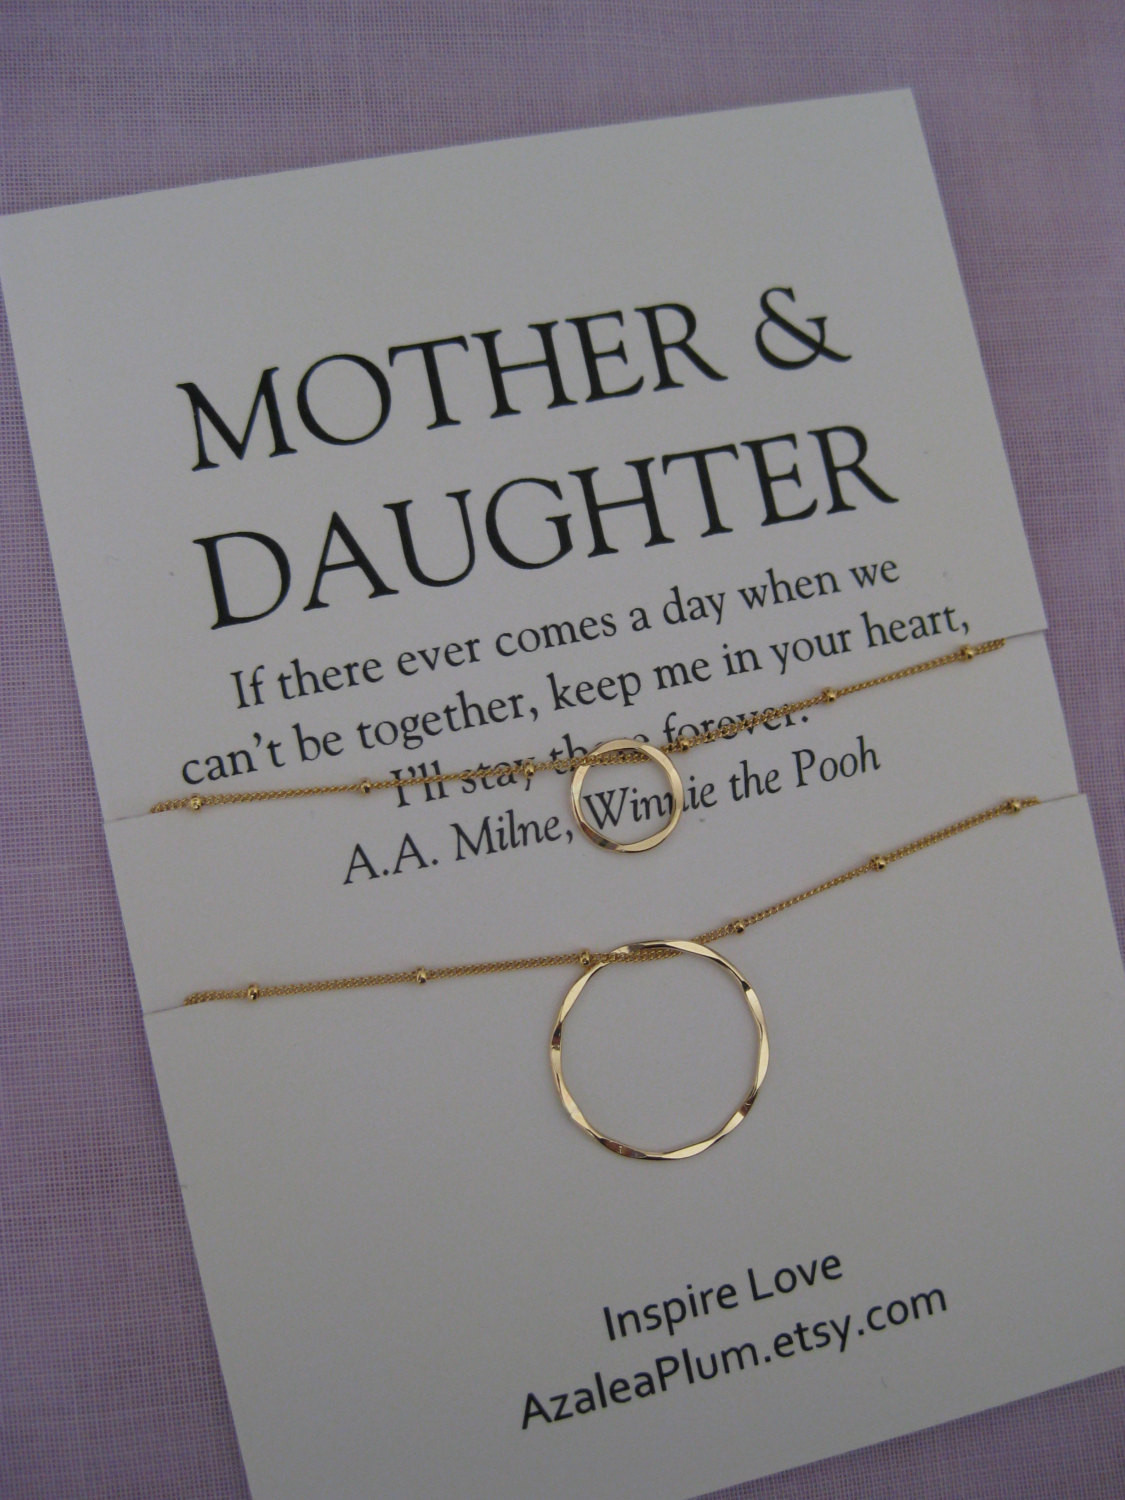 Mothers Birthday Gift Ideas
 Mom MOTHER Daughter Jewelry 50th birthday Gift by AzaleaPlum